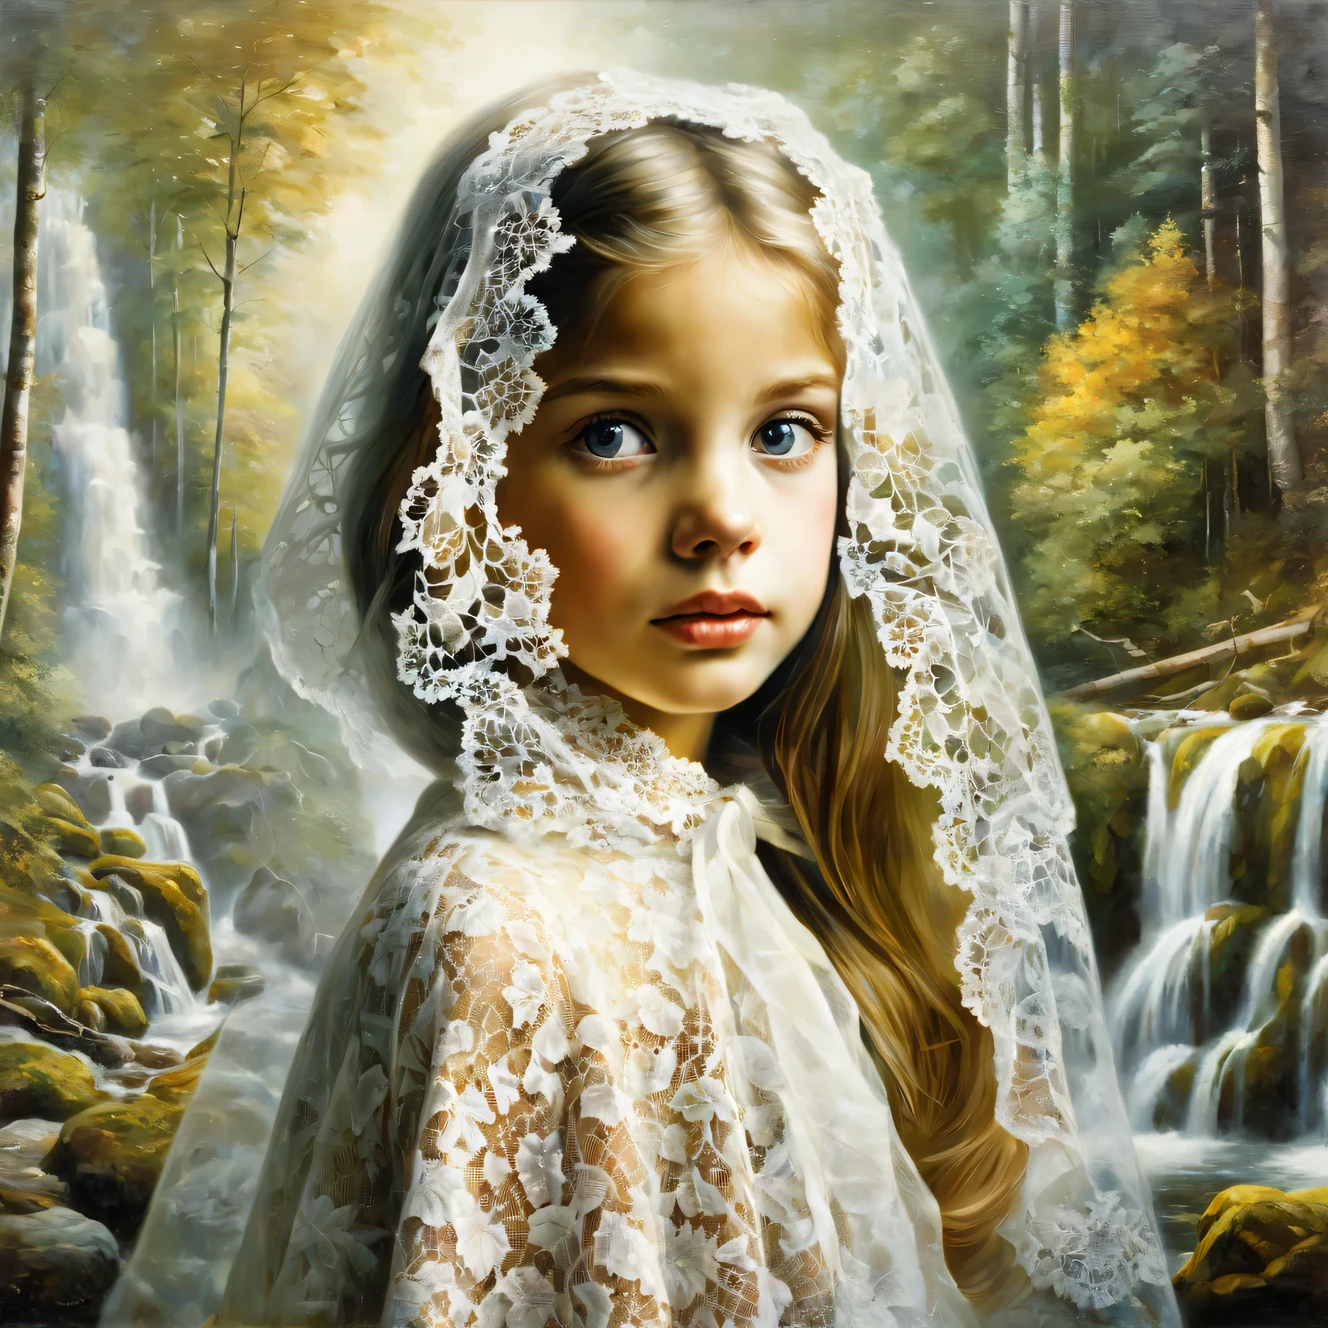 Oil painting on canvas Oil painting on canvas with double exposure effect, (in the foreground is the dreamy face of a beautiful elf with a wicker floral wreath on her head), (in the background there is a landscape of a beautiful forest waterfall under the morning sun), High detail, A high resolution, maximum realism, Hugh Douglas Hamilton, Alexey Savrasov, Fedor Vasiliev, Rob Gonsalves, Peder Monstead,